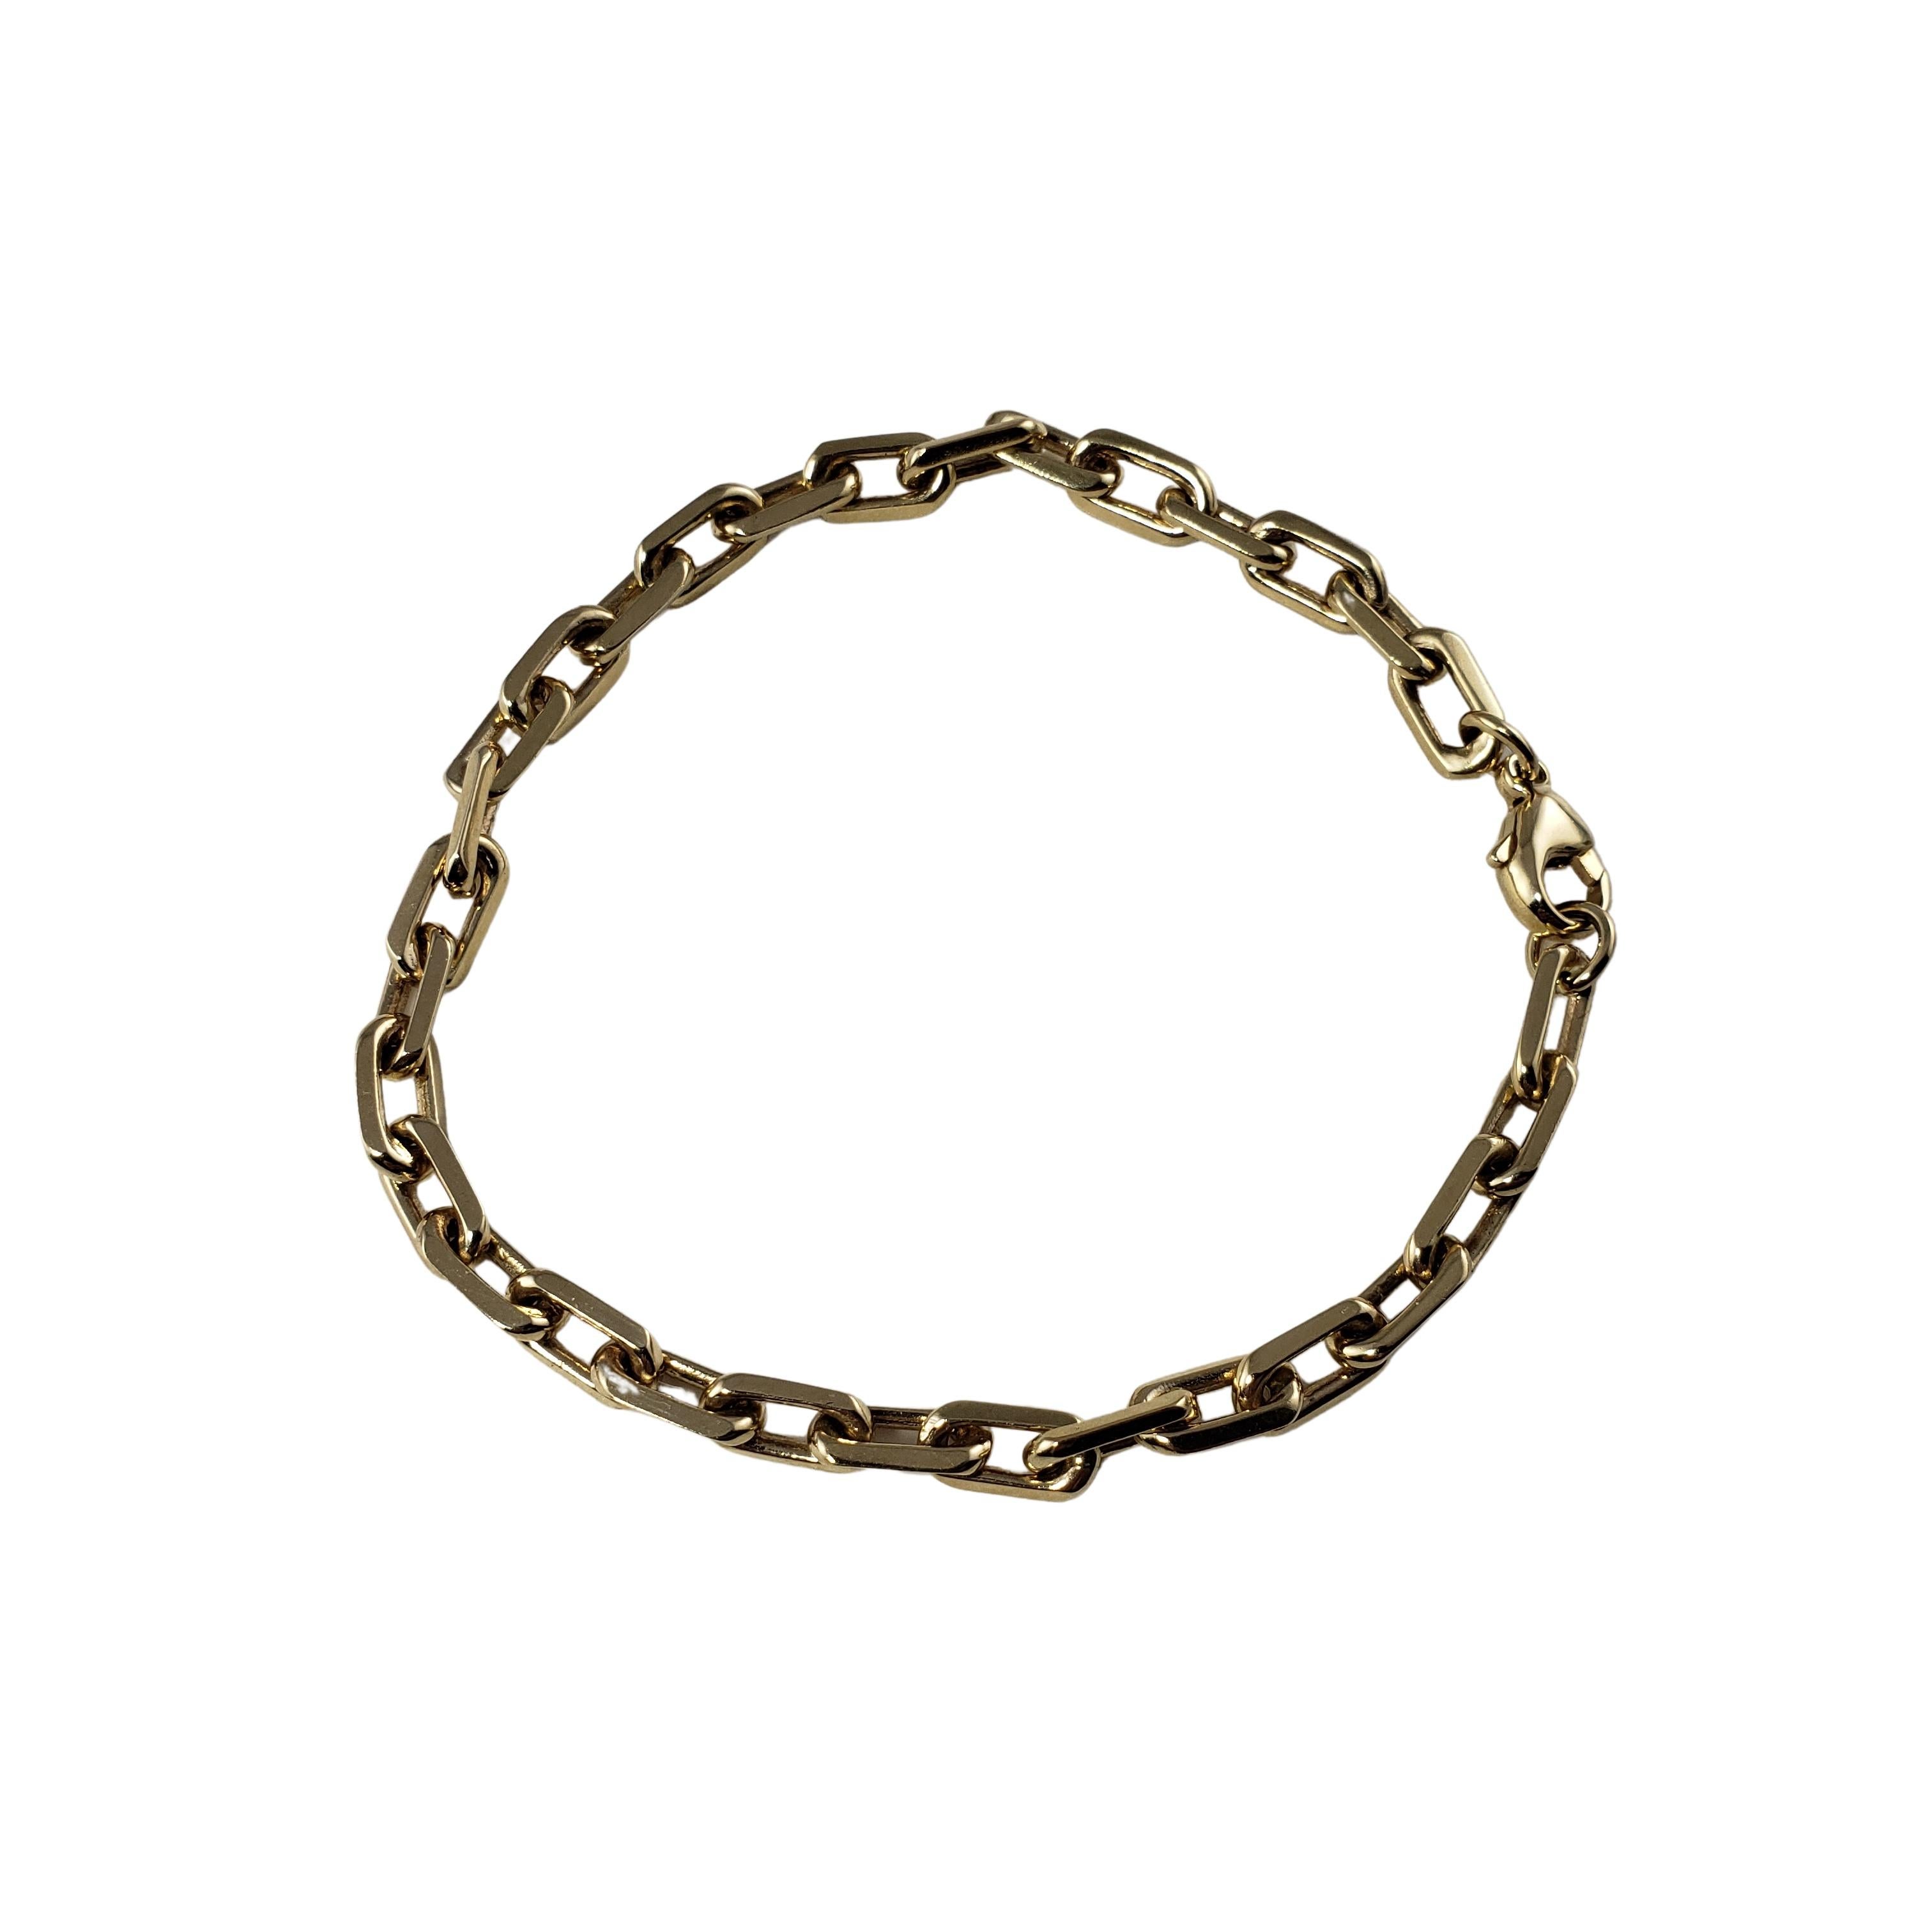 Vintage 14 Karat Yellow Gold Link Bracelet-

This elegant link bracelet is crafted in beautifully detailed 14K yellow gold. Width: 5 mm.

Size: 6.75 inches

Weight: 8.0 dwt. / 12.5 gr.

Stamped: 585

Very good condition, professionally